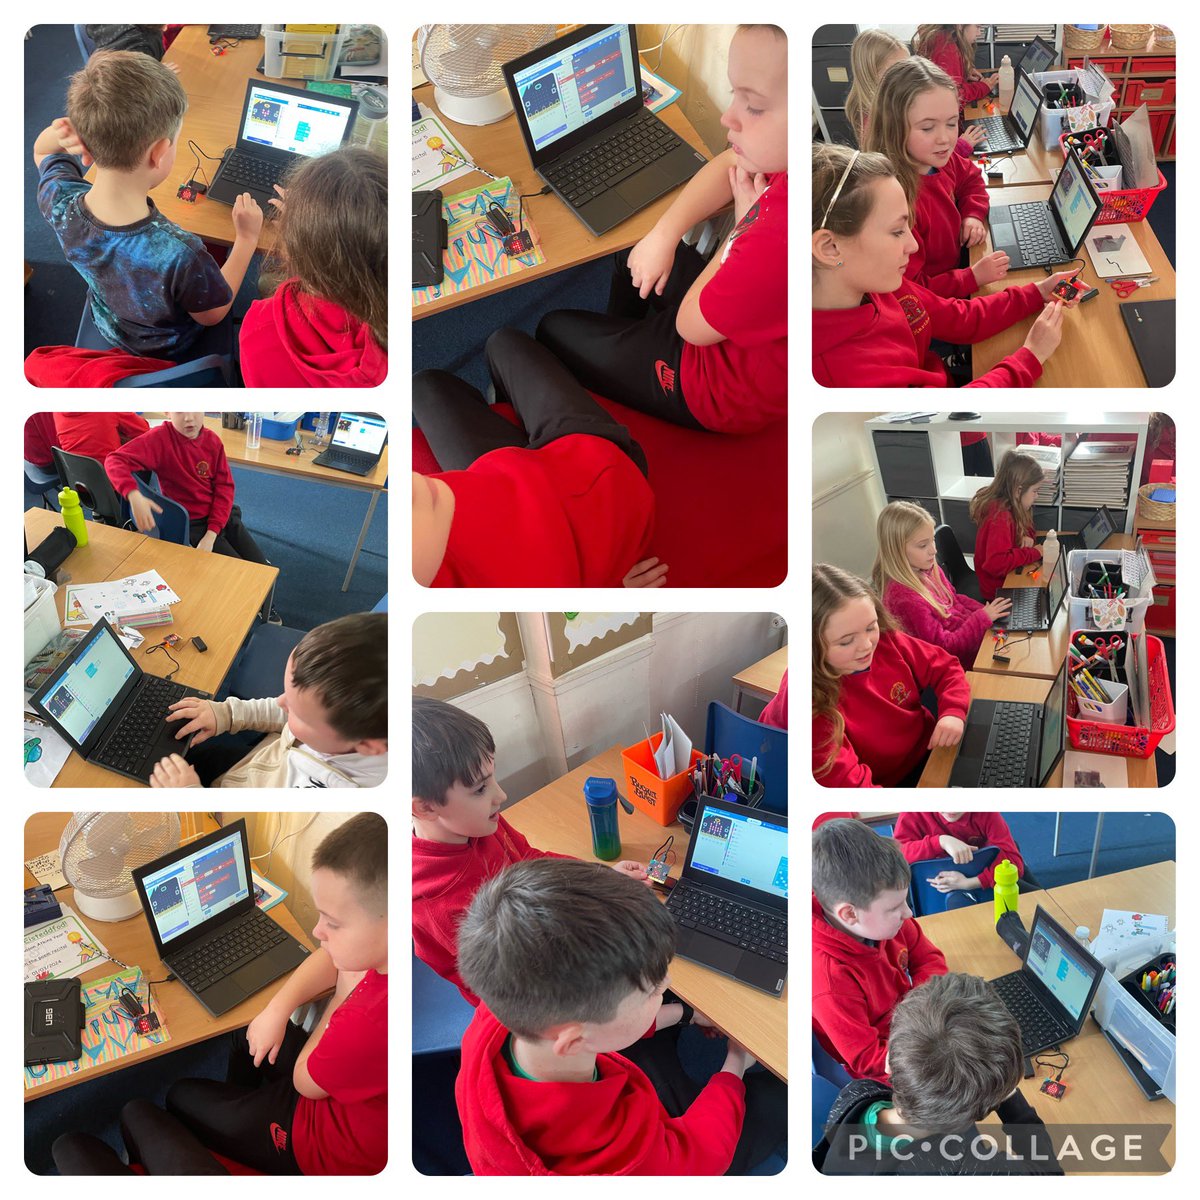 👩‍🏫 Enhanced Learning: Microbits provide hands-on coding experience, sparking creativity and problem-solving skills in students of all ages. From creating games to solving real-world problems, the possibilities are endless! @STEMLearningUK @GlyncoedP #GPSREACH